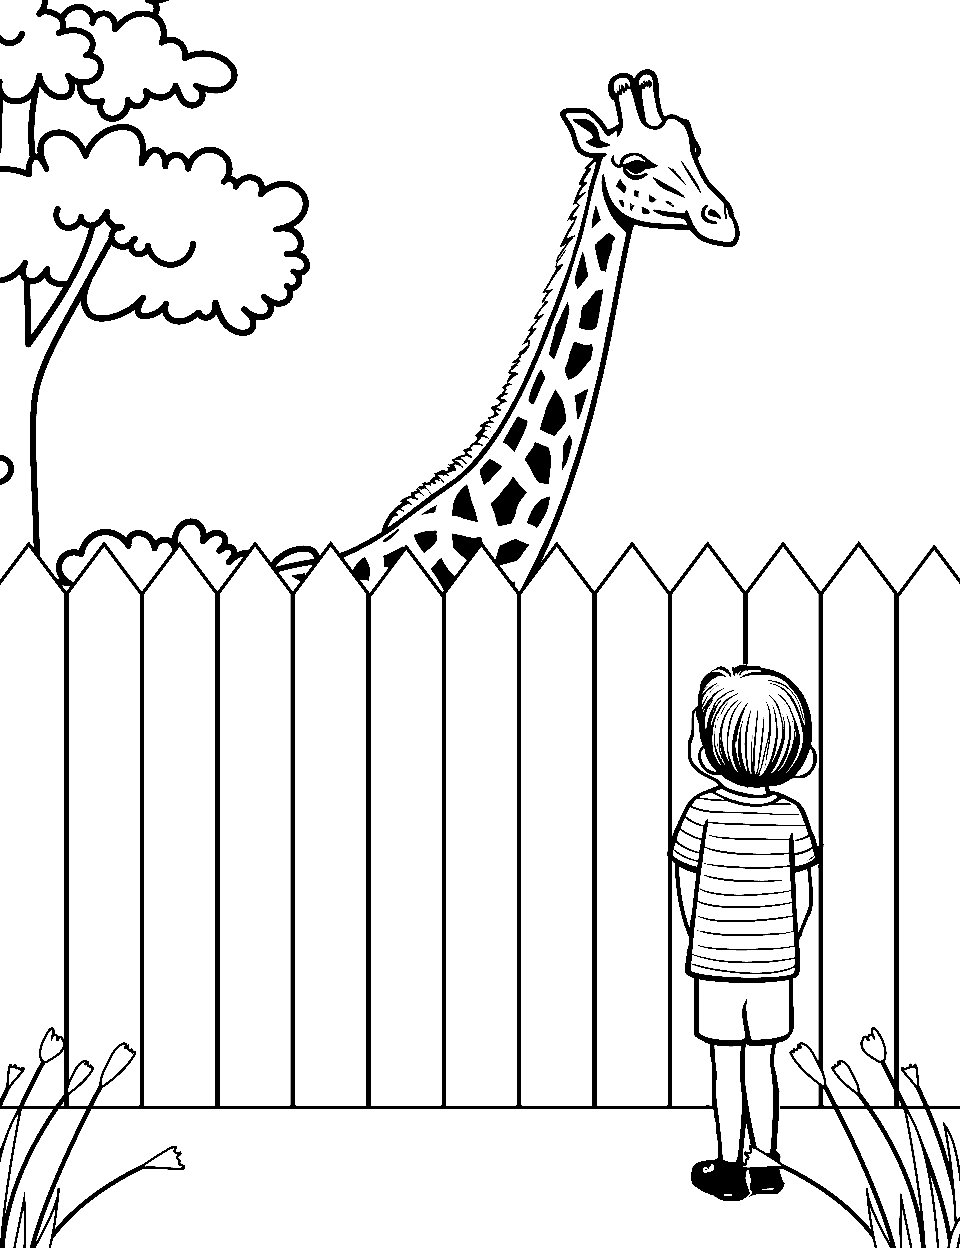 Zoo Day Out Coloring Page - A kid watching a giraffe from up close inside the zoo.